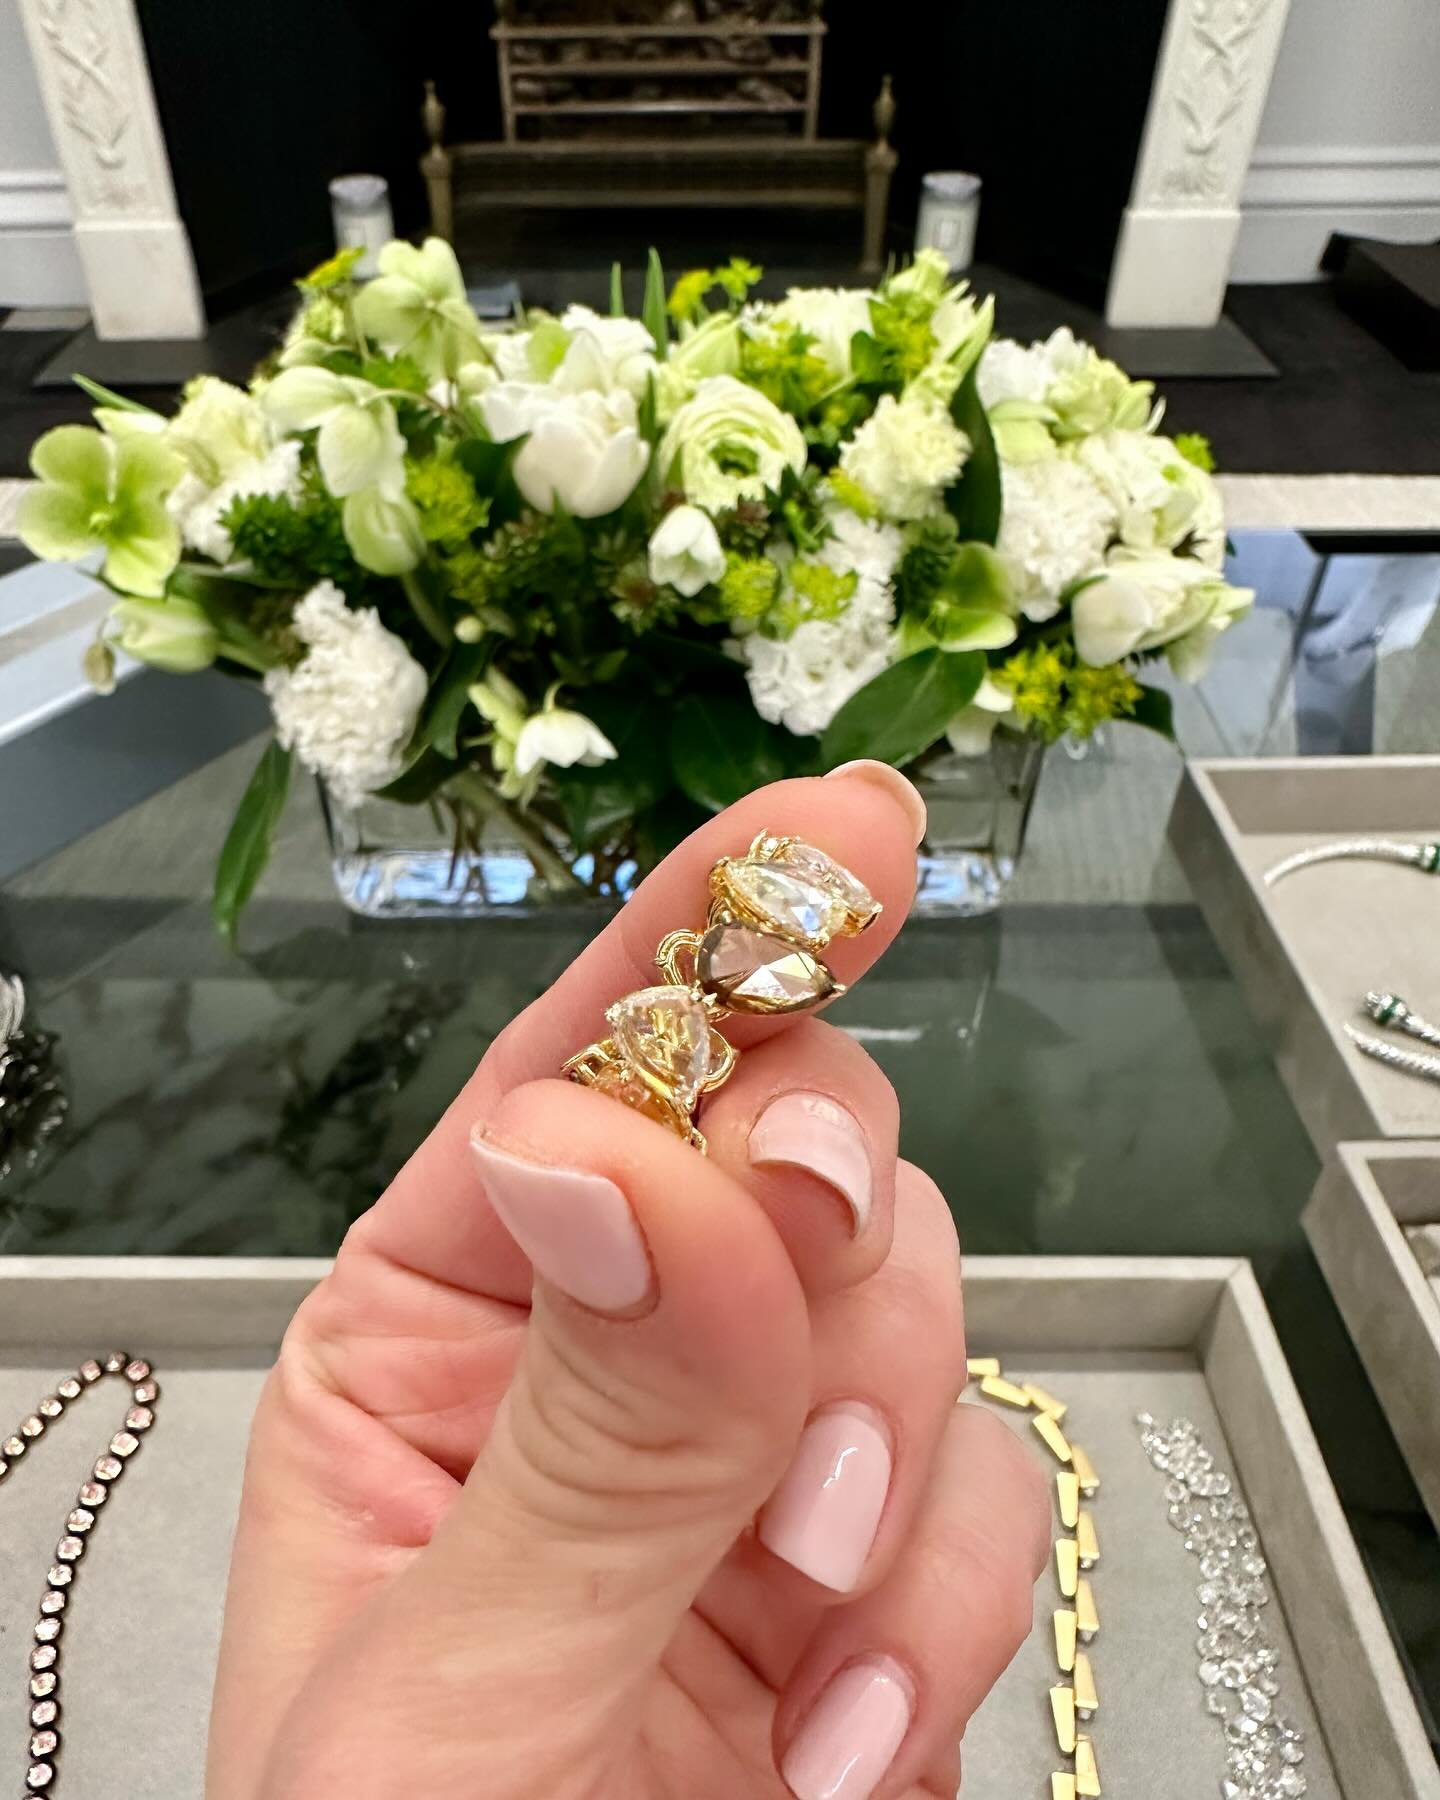 Play time with @luganodiamonds ✨ 
Have you ever seen floating diamonds moving so seamlessly like this and with no casing? Incredible 💎 
Thank you @elena_hernandez_b for sharing the magic 🤍